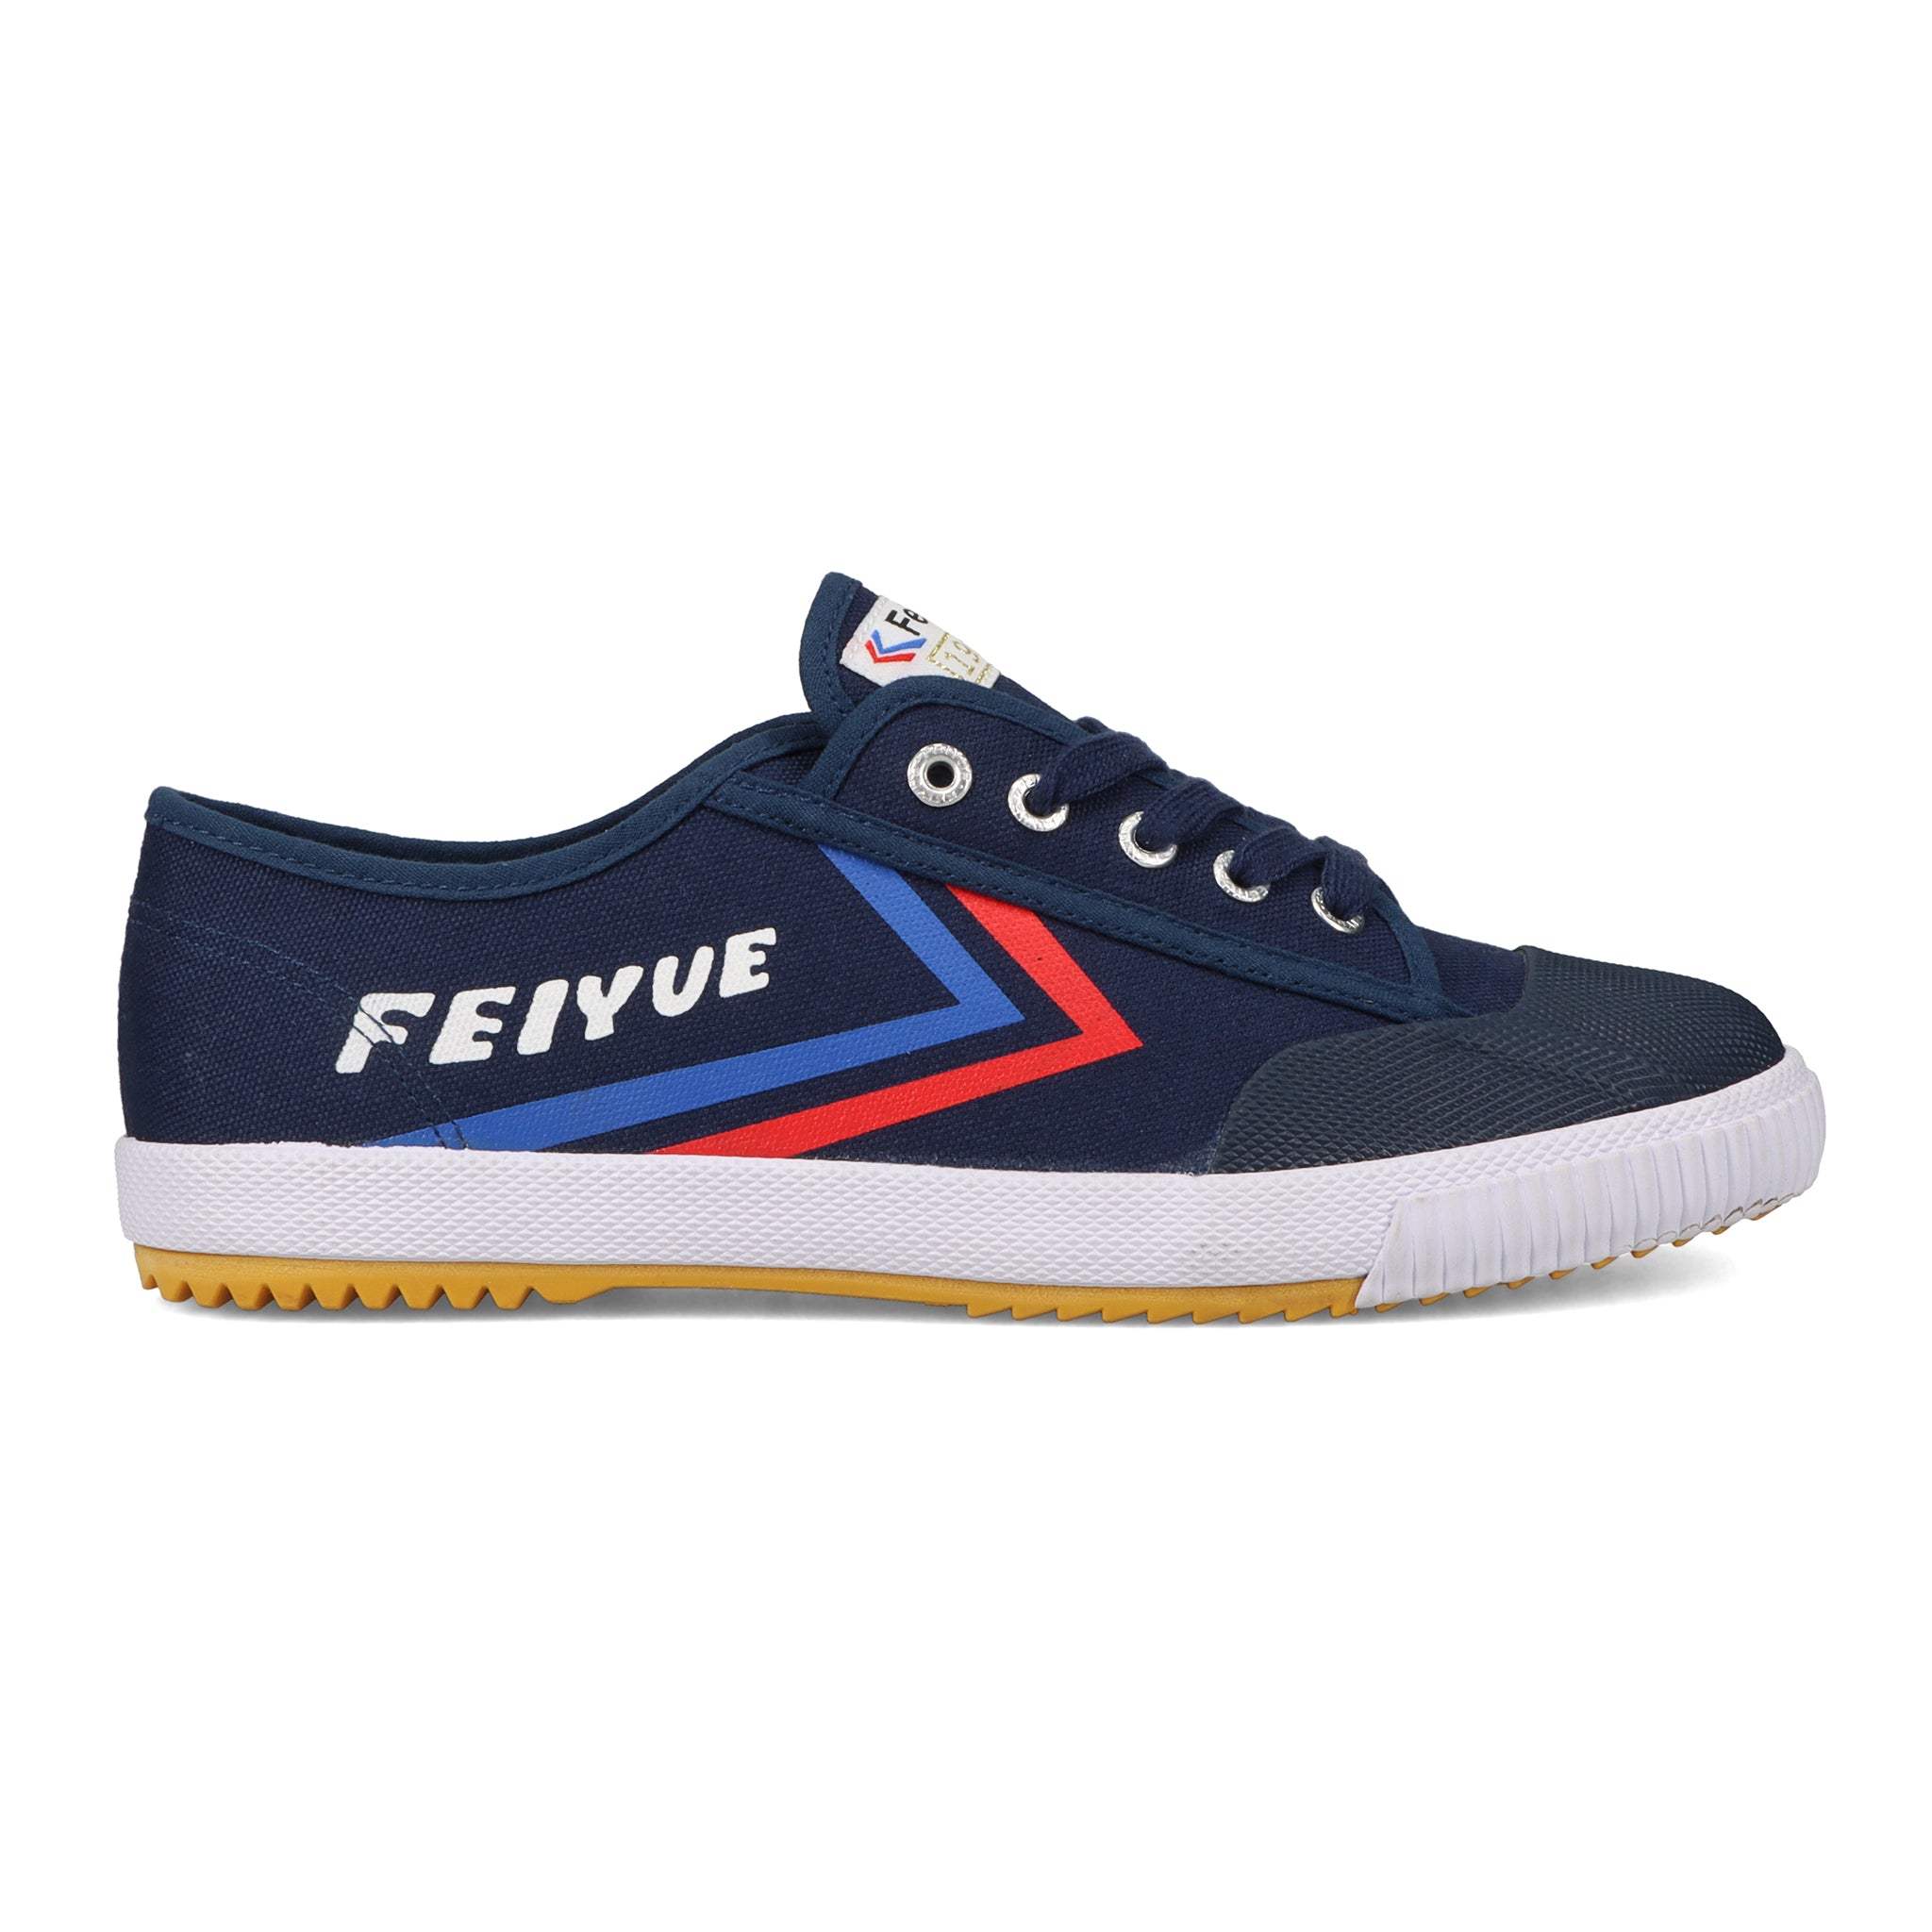 Feiyue x Marvel - Captain America Low Canvas Shoes